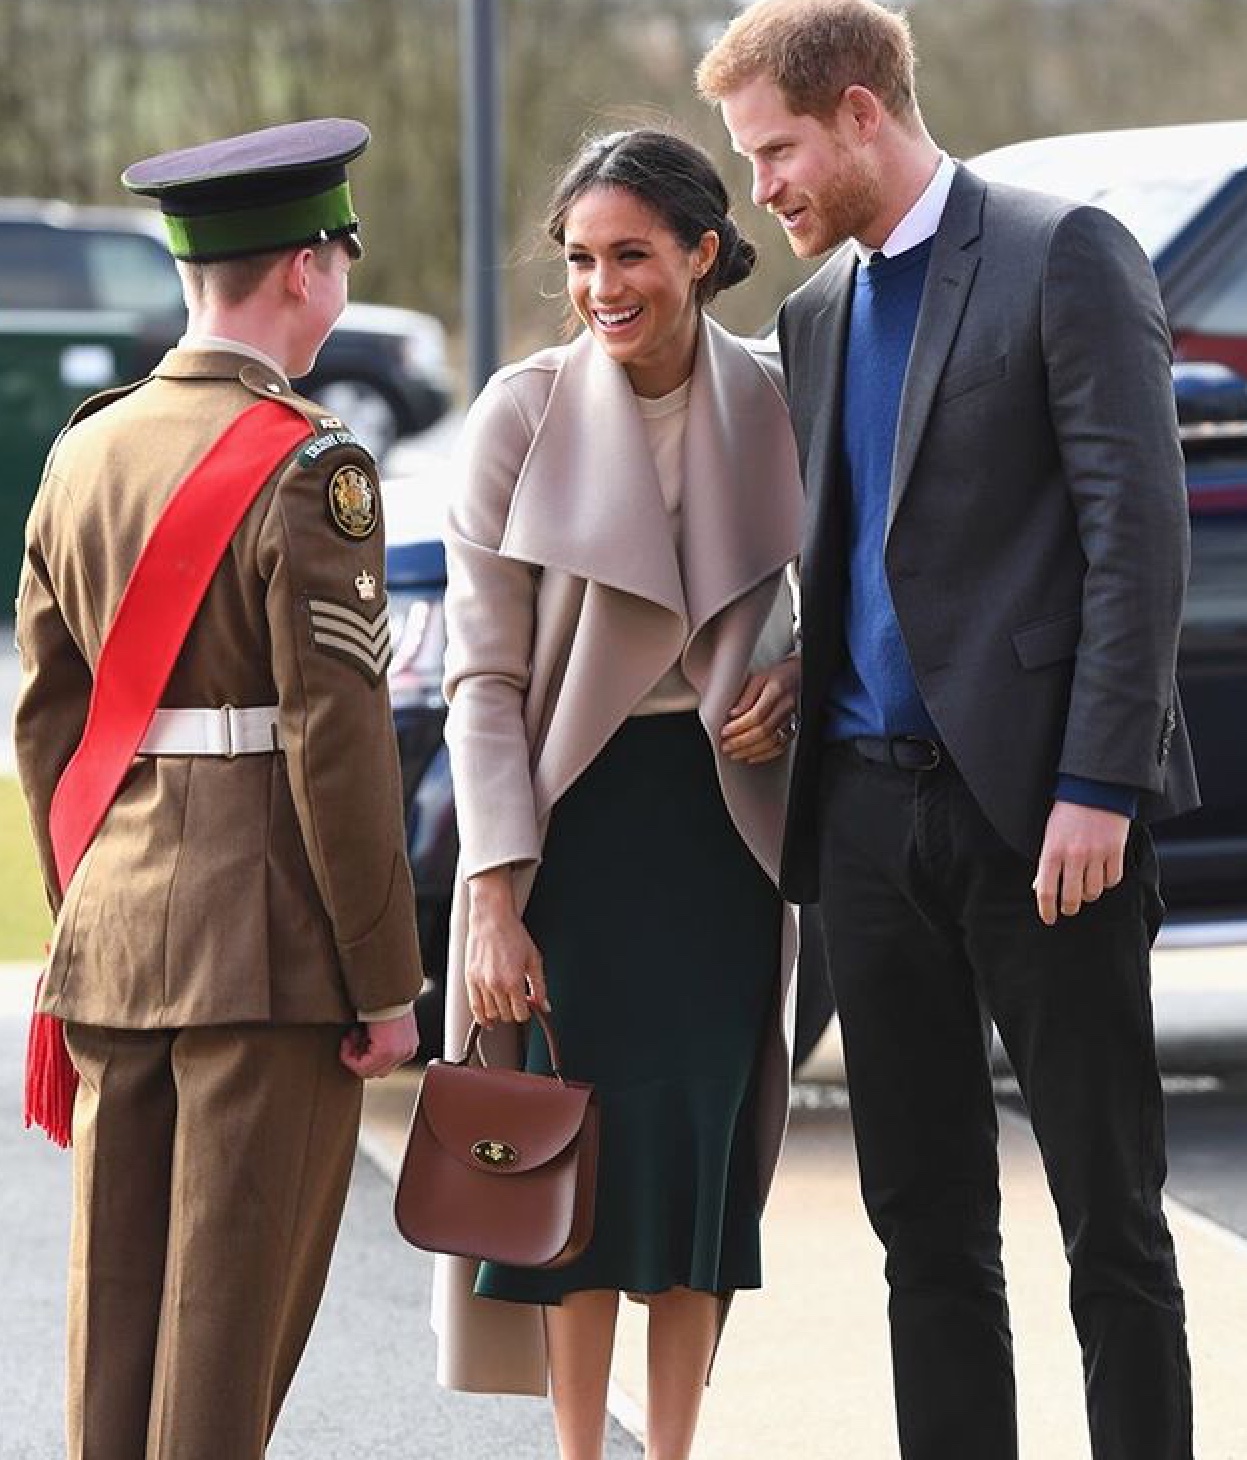 Prince Harry And Meghan Markle Visit Northern Ireland – The Real My Royals